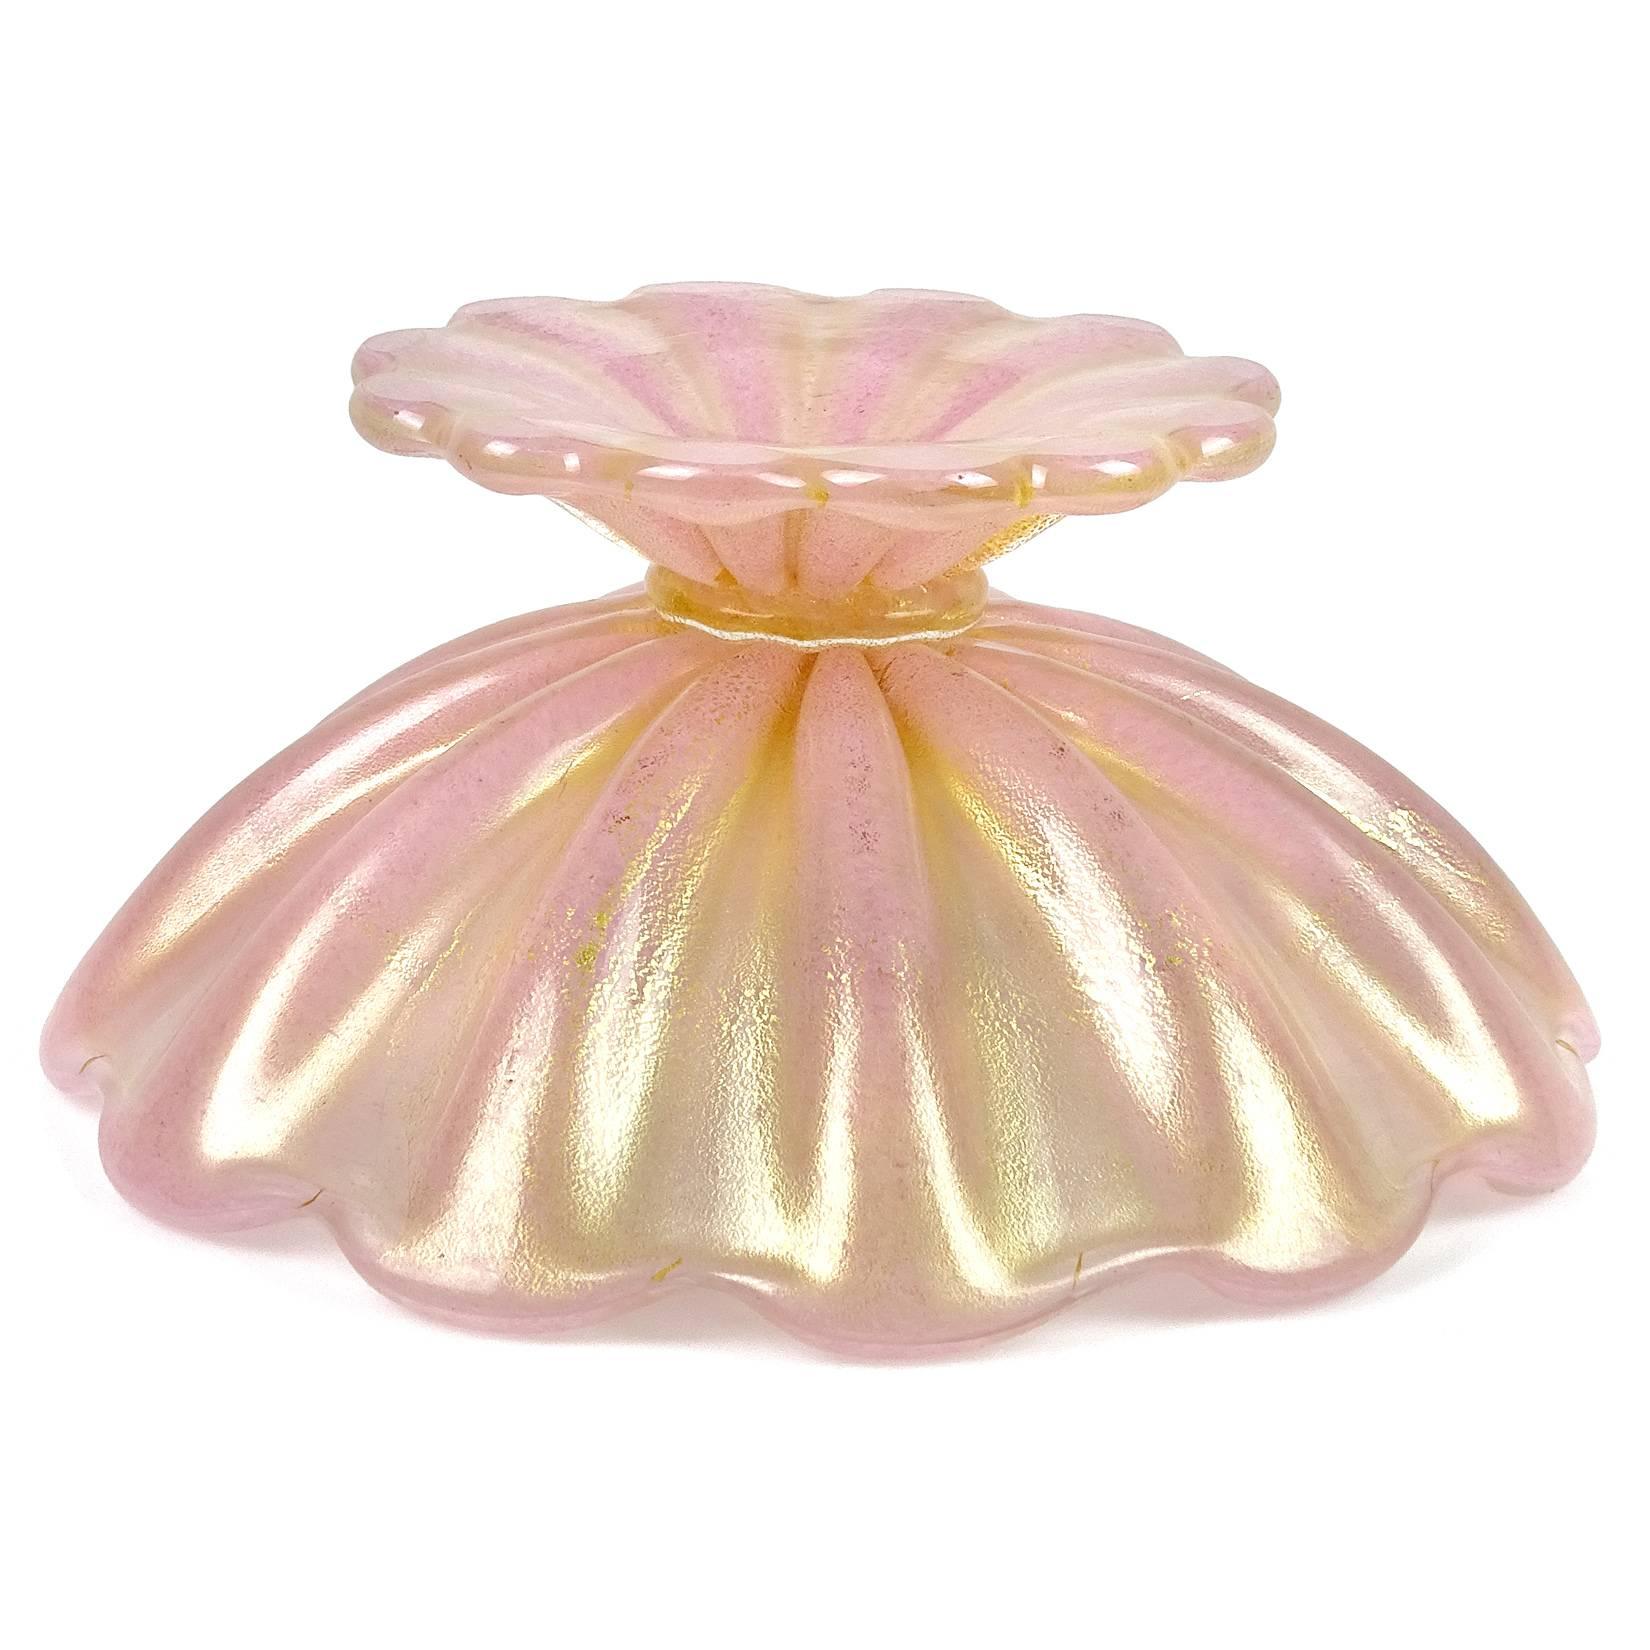 Hand-Crafted Barovier Toso Murano Pink Gold Flecks Italian Art Glass Ribbed Compote Bowl